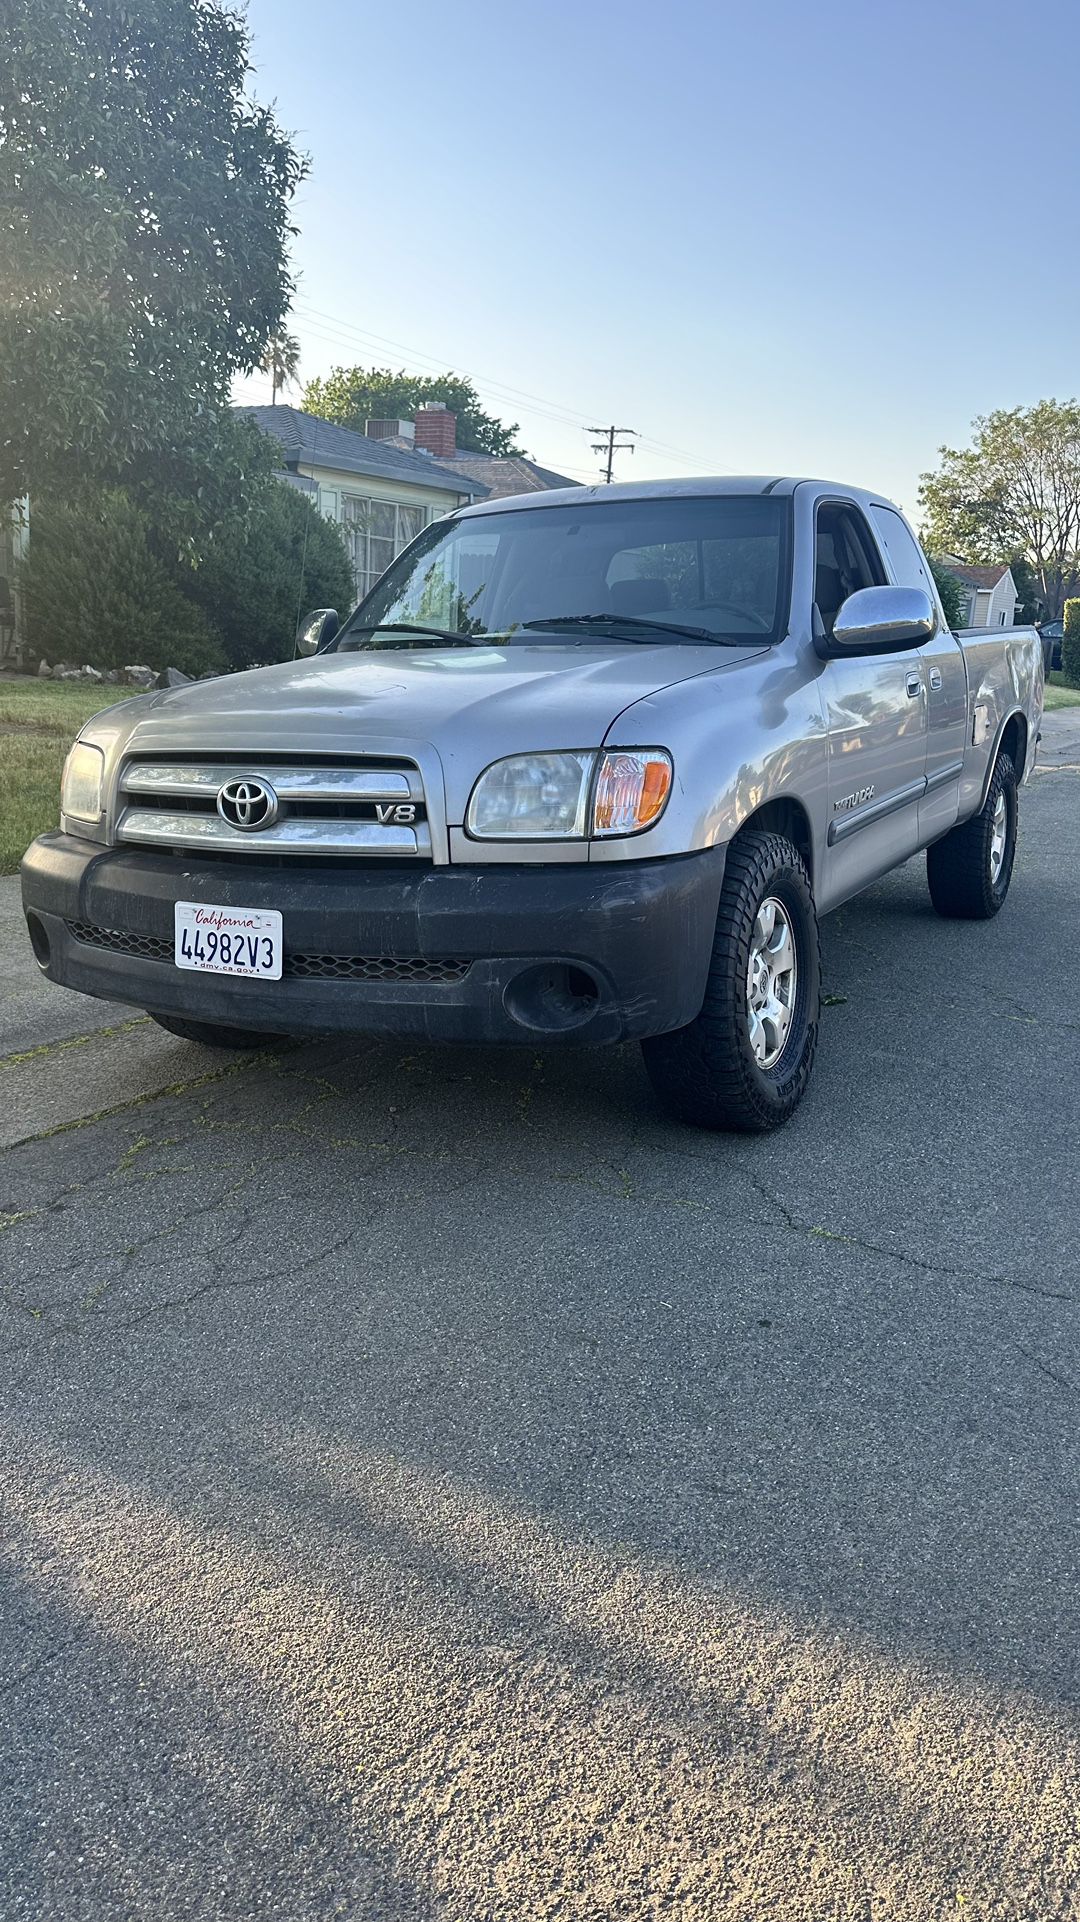 Toyota Tundra 2003 Sr5 Priced For Quick Sale Excellent Deal 